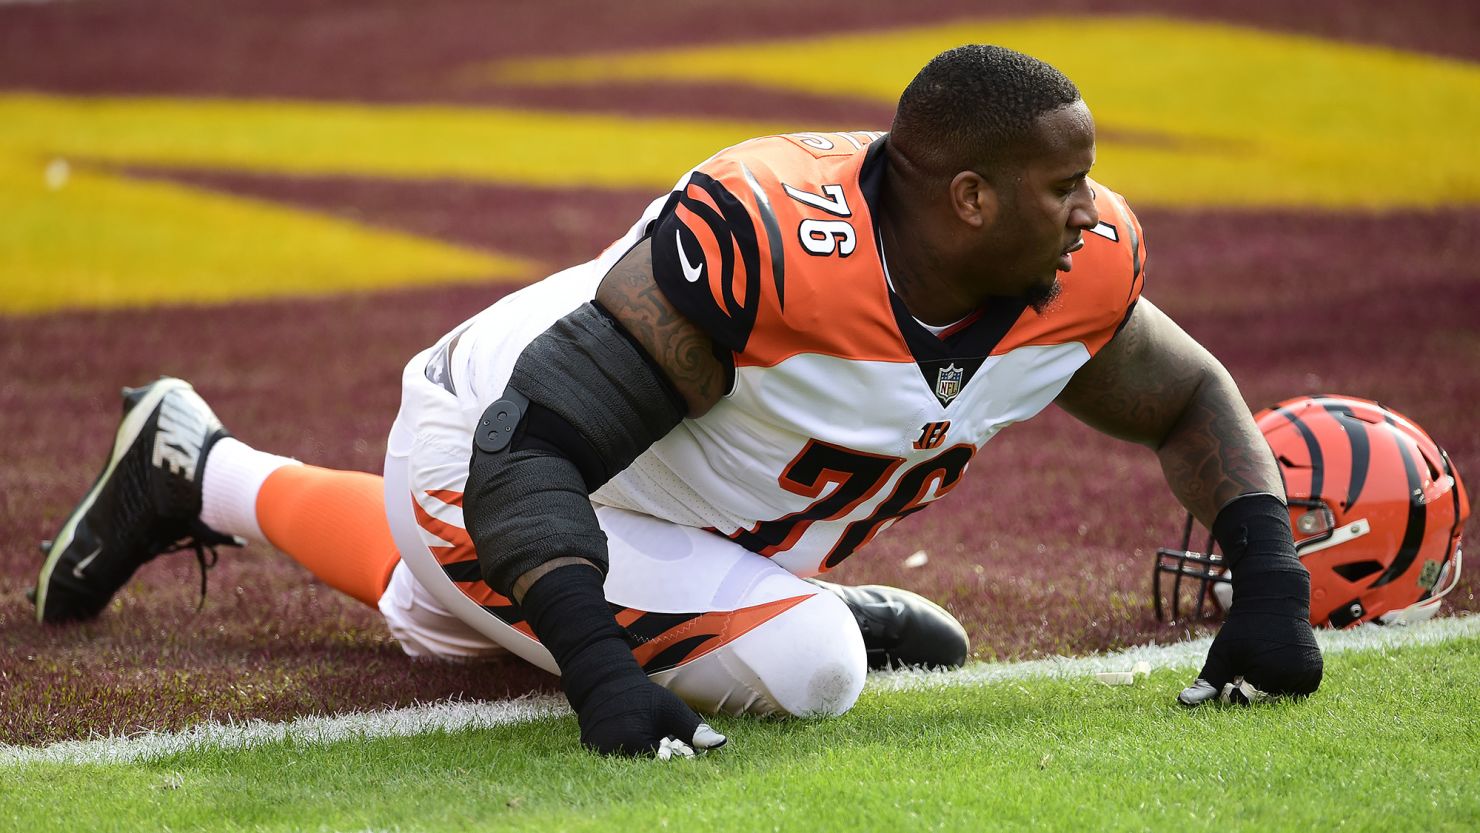 How yoga helps NFL pro bowler Mike Daniels tackle tension ahead of